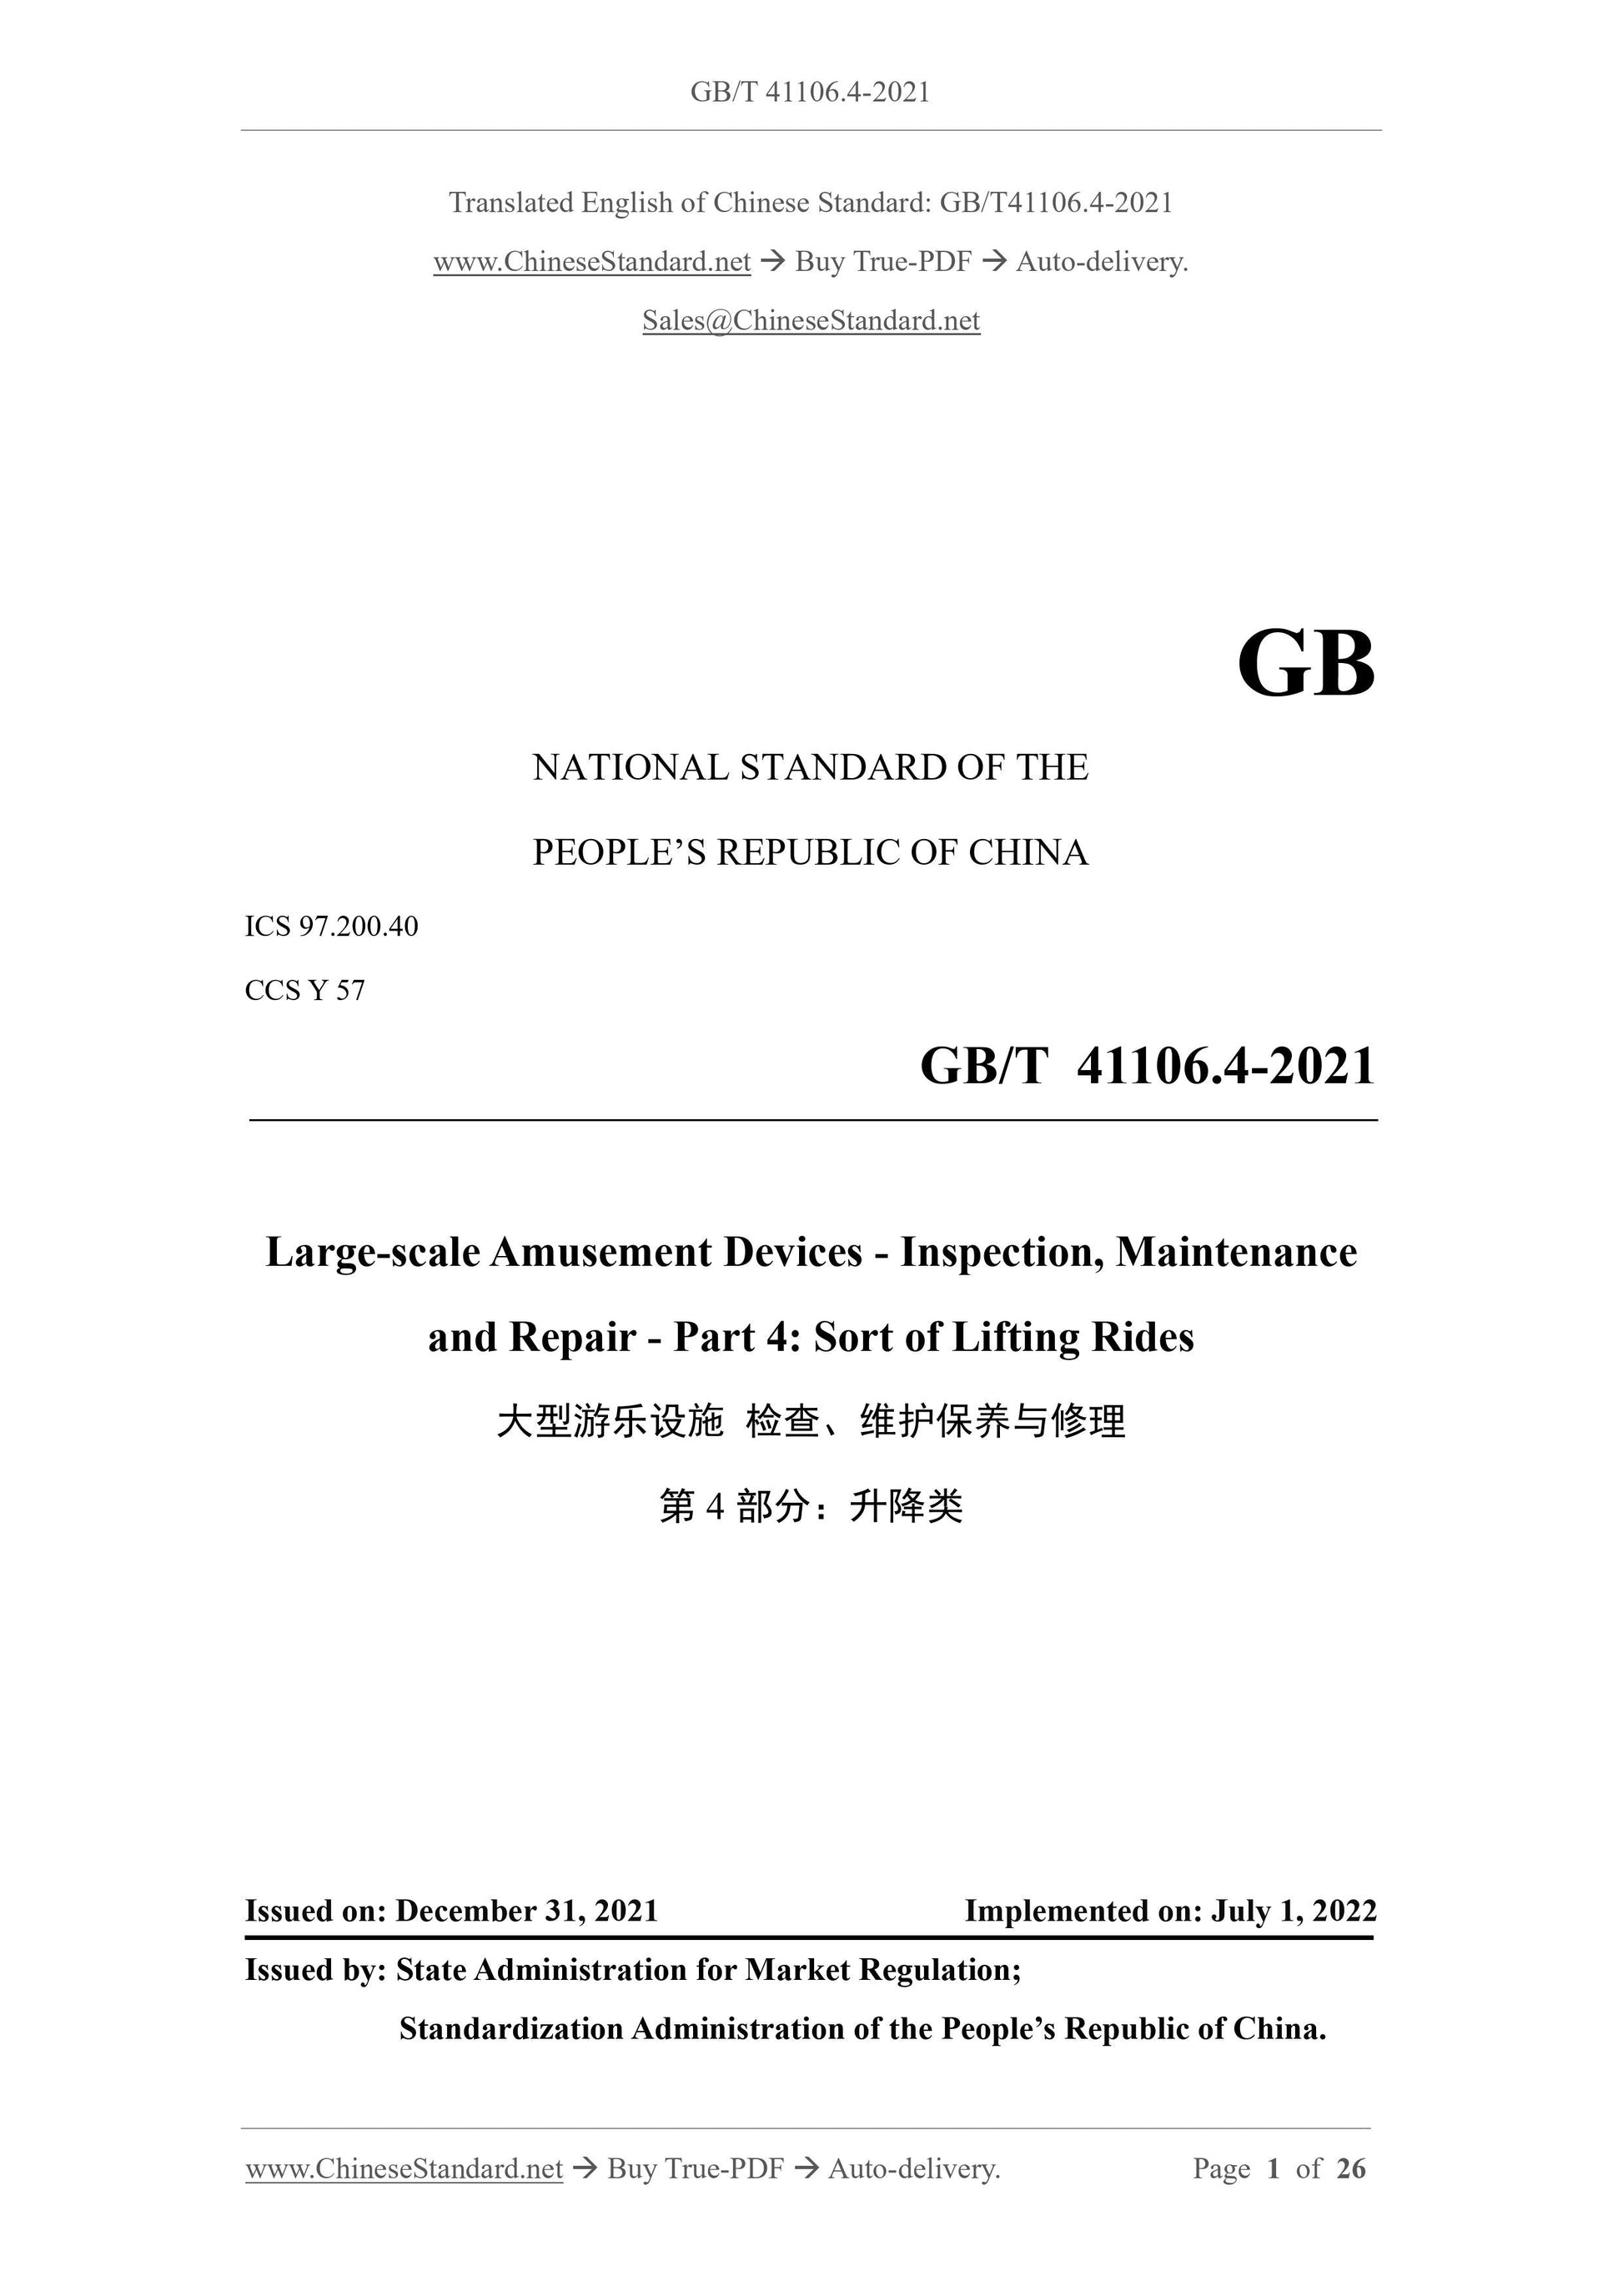 GB/T 41106.4-2021 Page 1